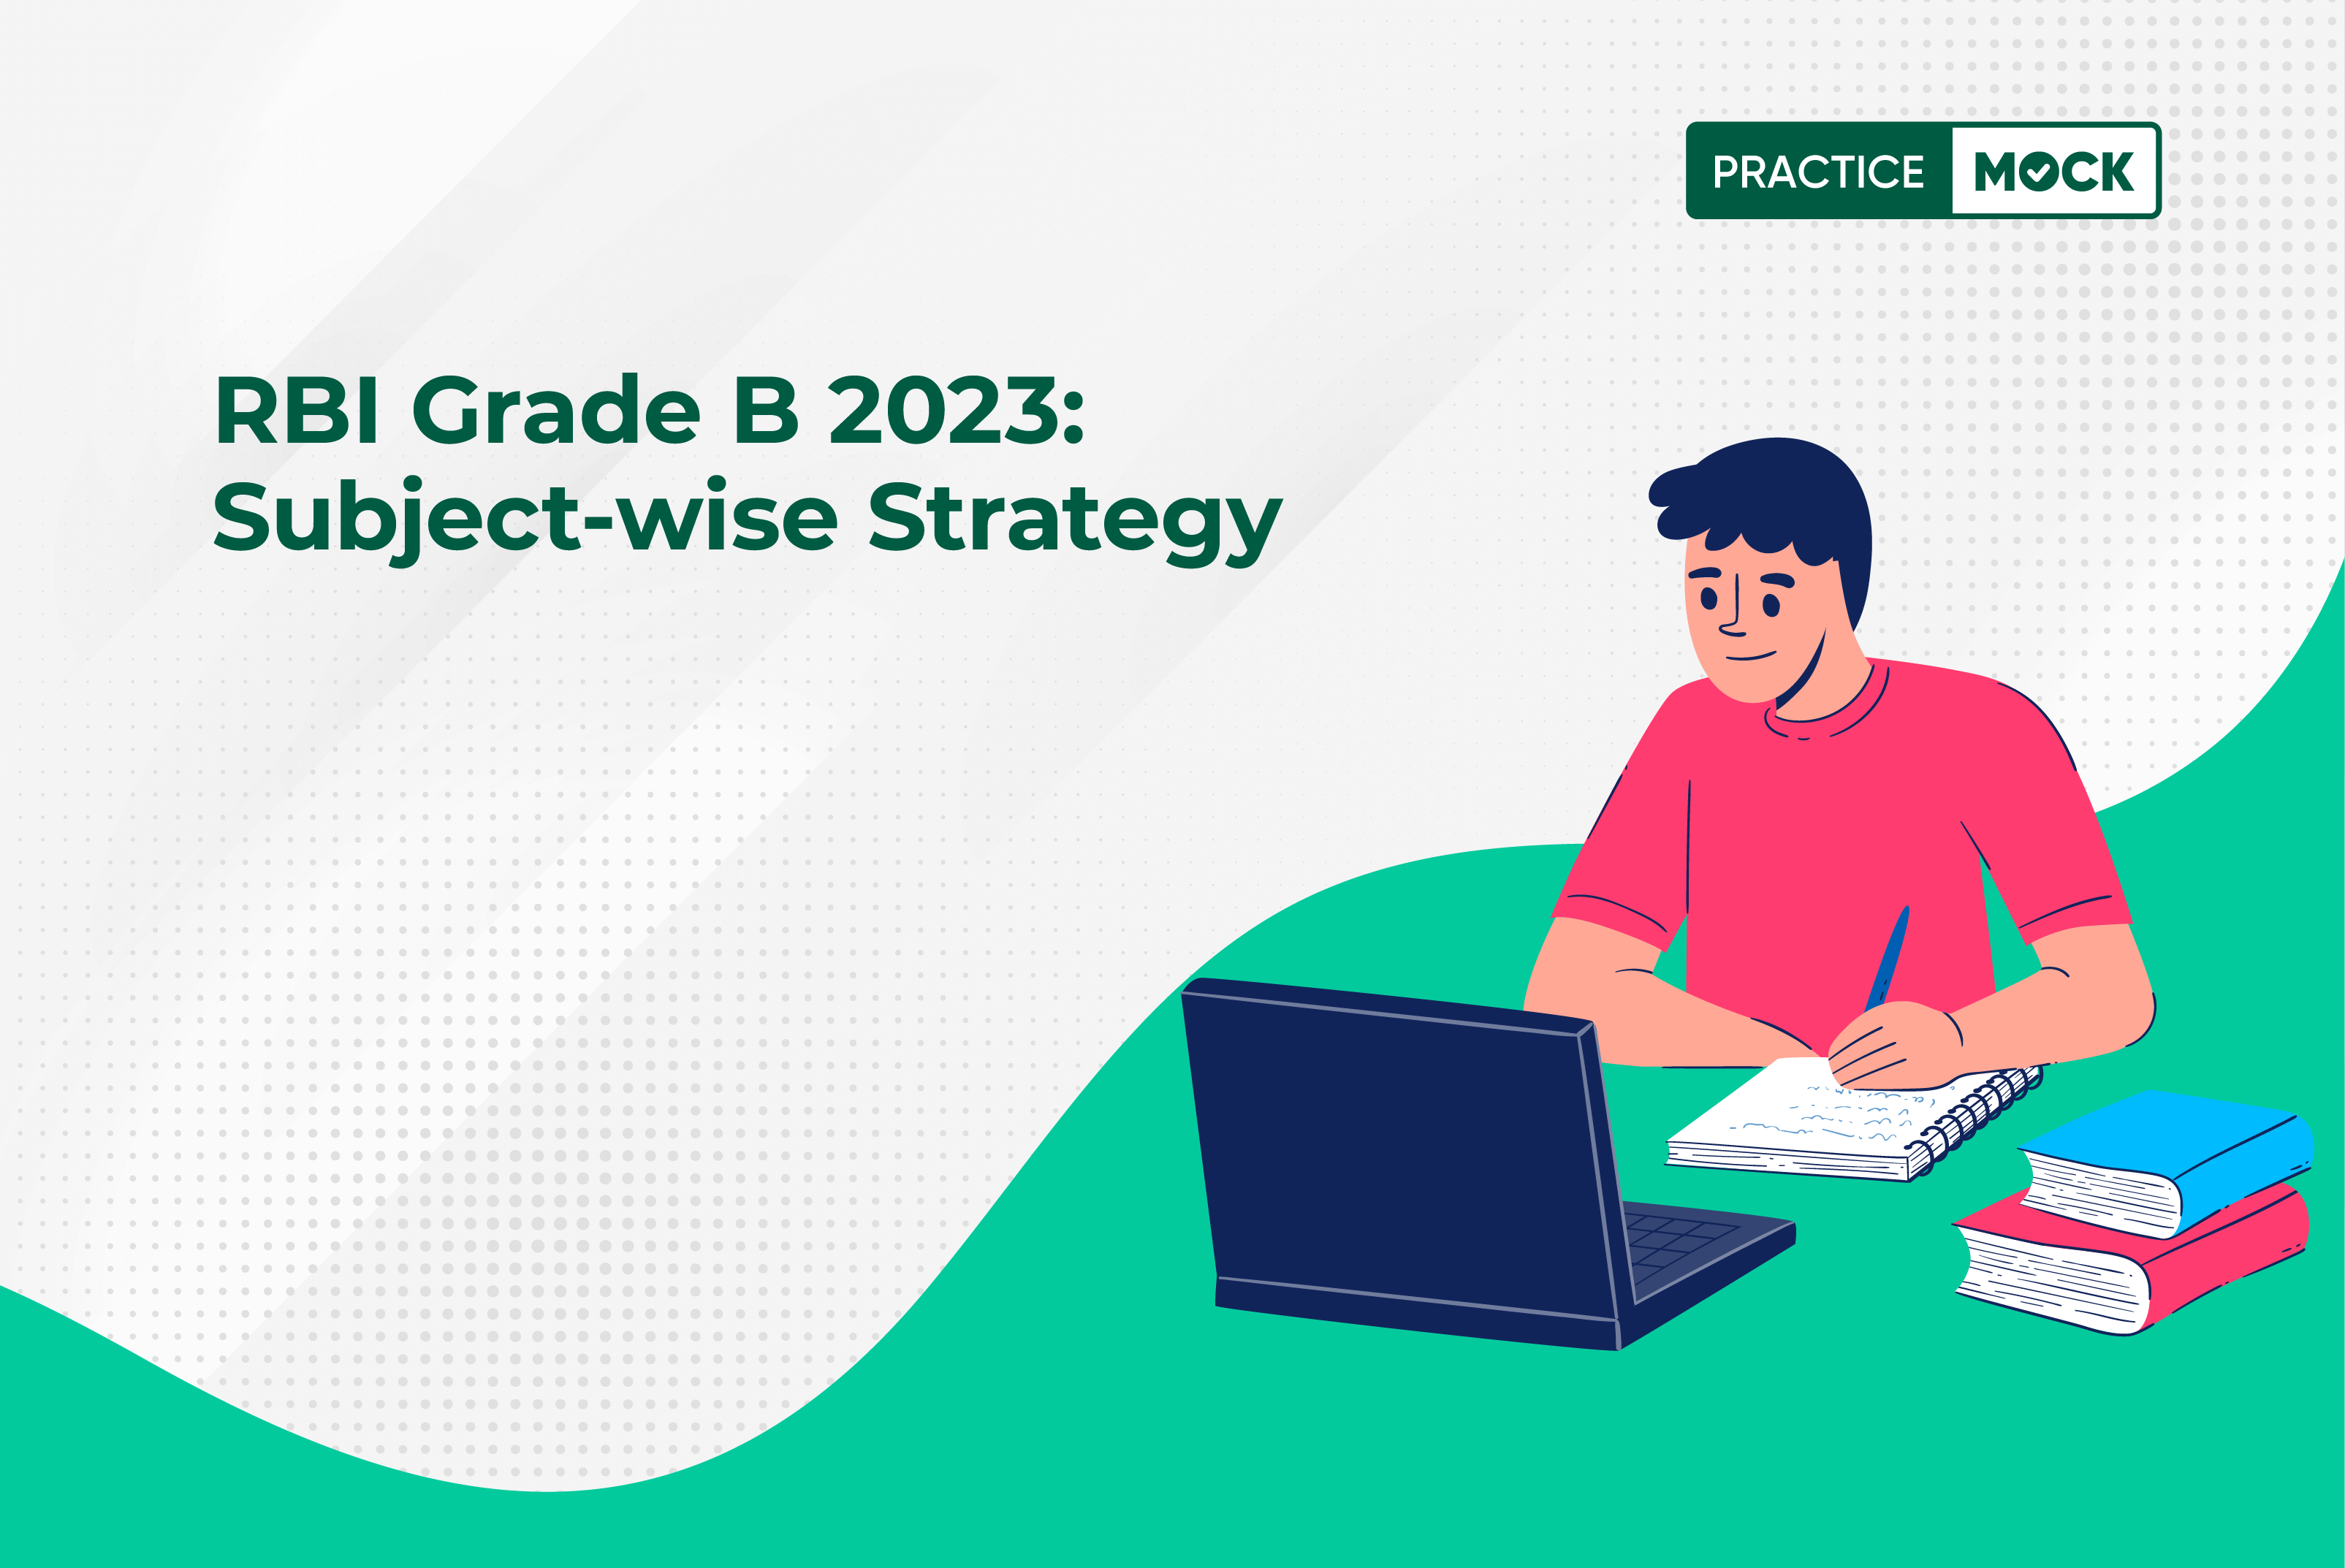 RBI Grade B 2023 Preparation: Toppers' Subject-wise Strategy for Phase I & II Exam